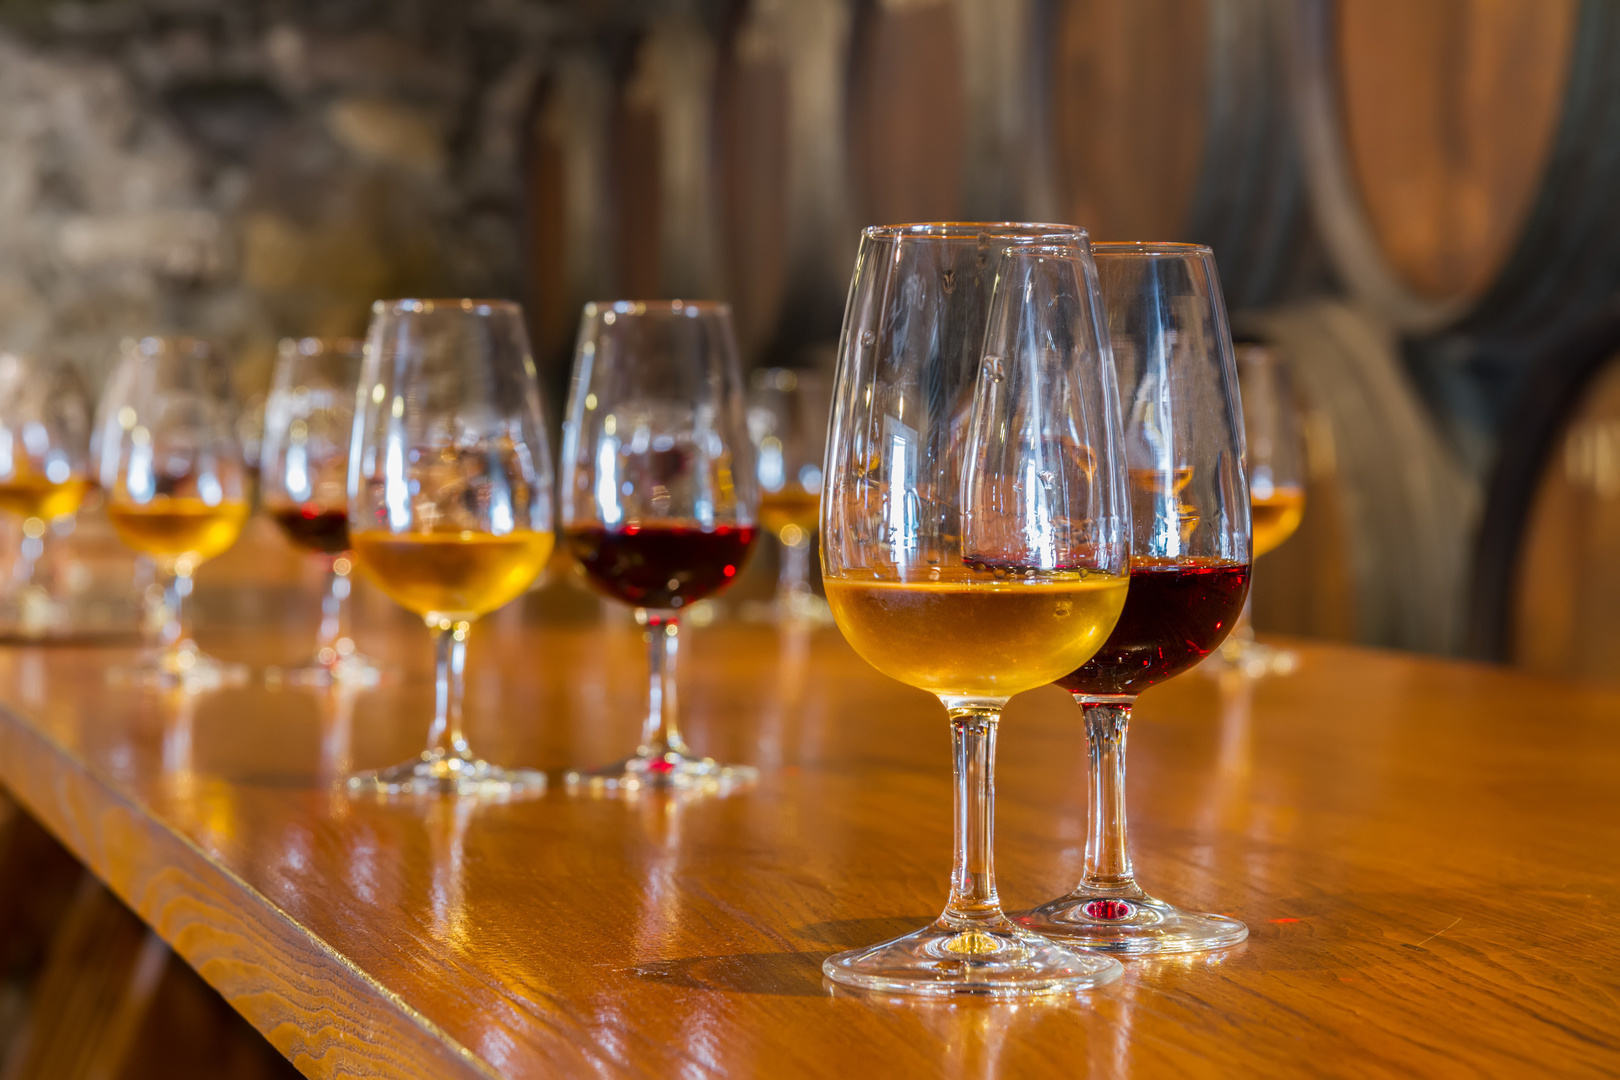 All About Sherry [October 2], Cambridge, Massachusetts, United States